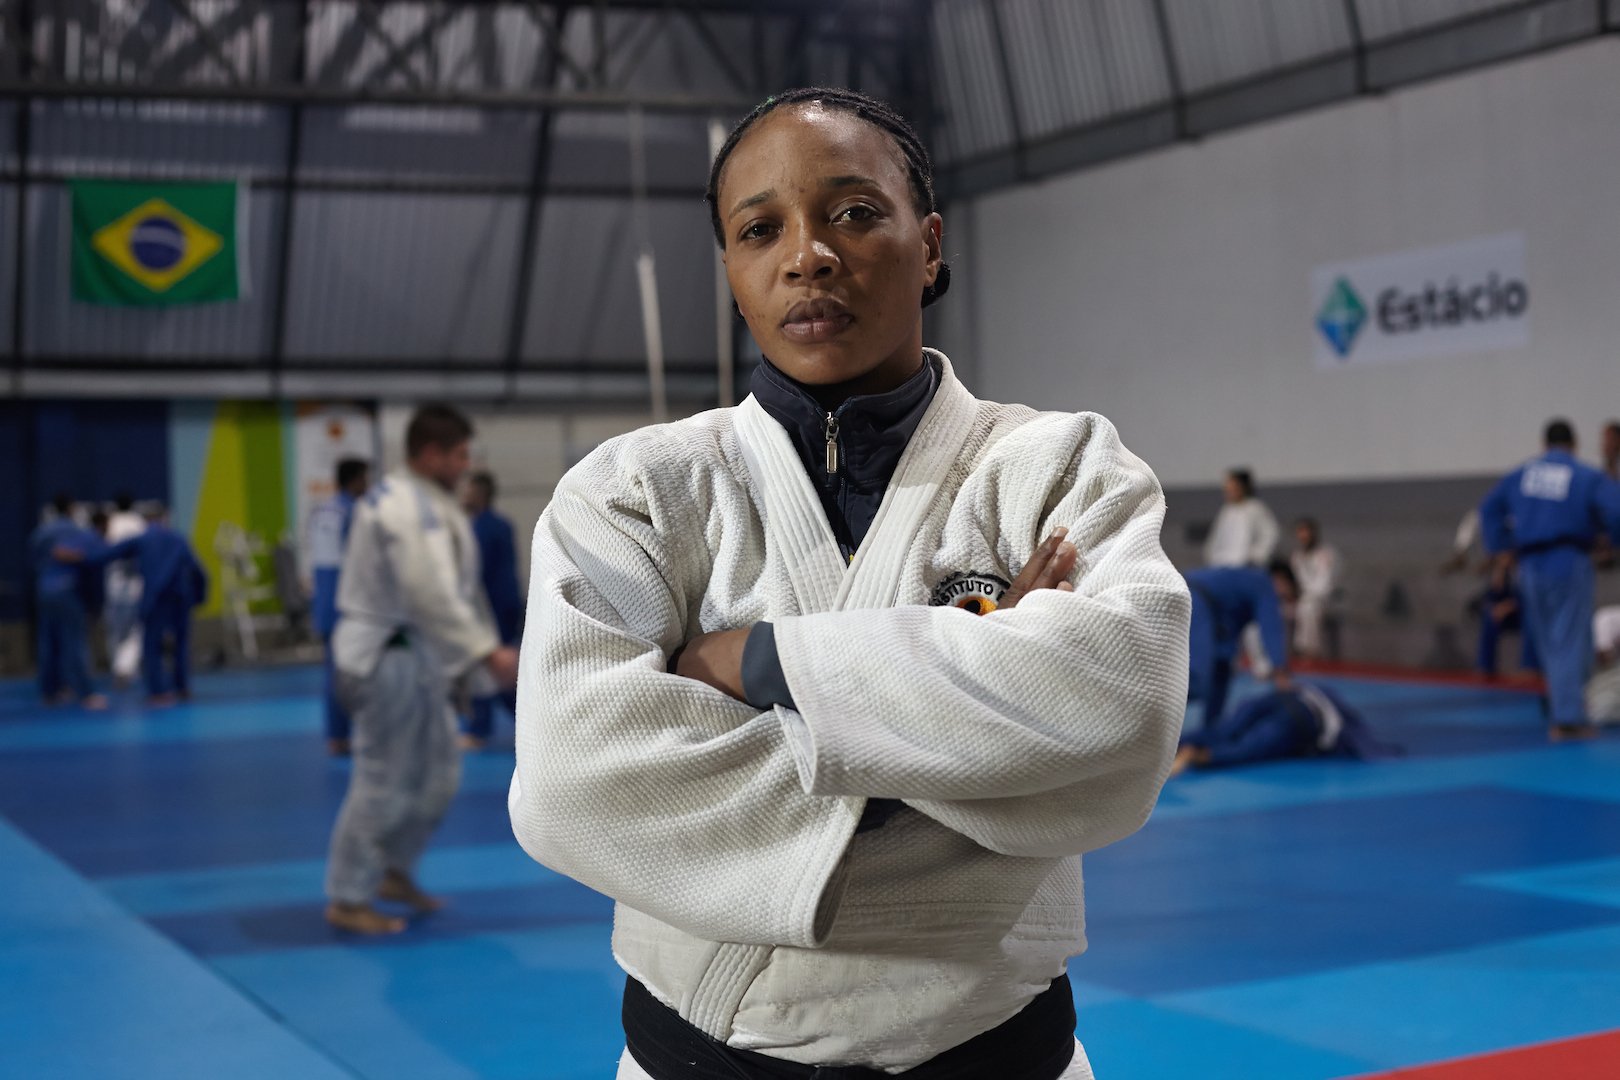 Judo athlete Yolande Mabika after training in Rio de Janeiro. Misenga, a refugee from DR Congo living in Brazil, is trying to qualify for the Olympic Games Rio 2016 for a newly created Olympic Team of Refugees. The Refugee Olympic Team (ROT) will compete under the Olympic flag and have the Olympic anthem as its national anthem.